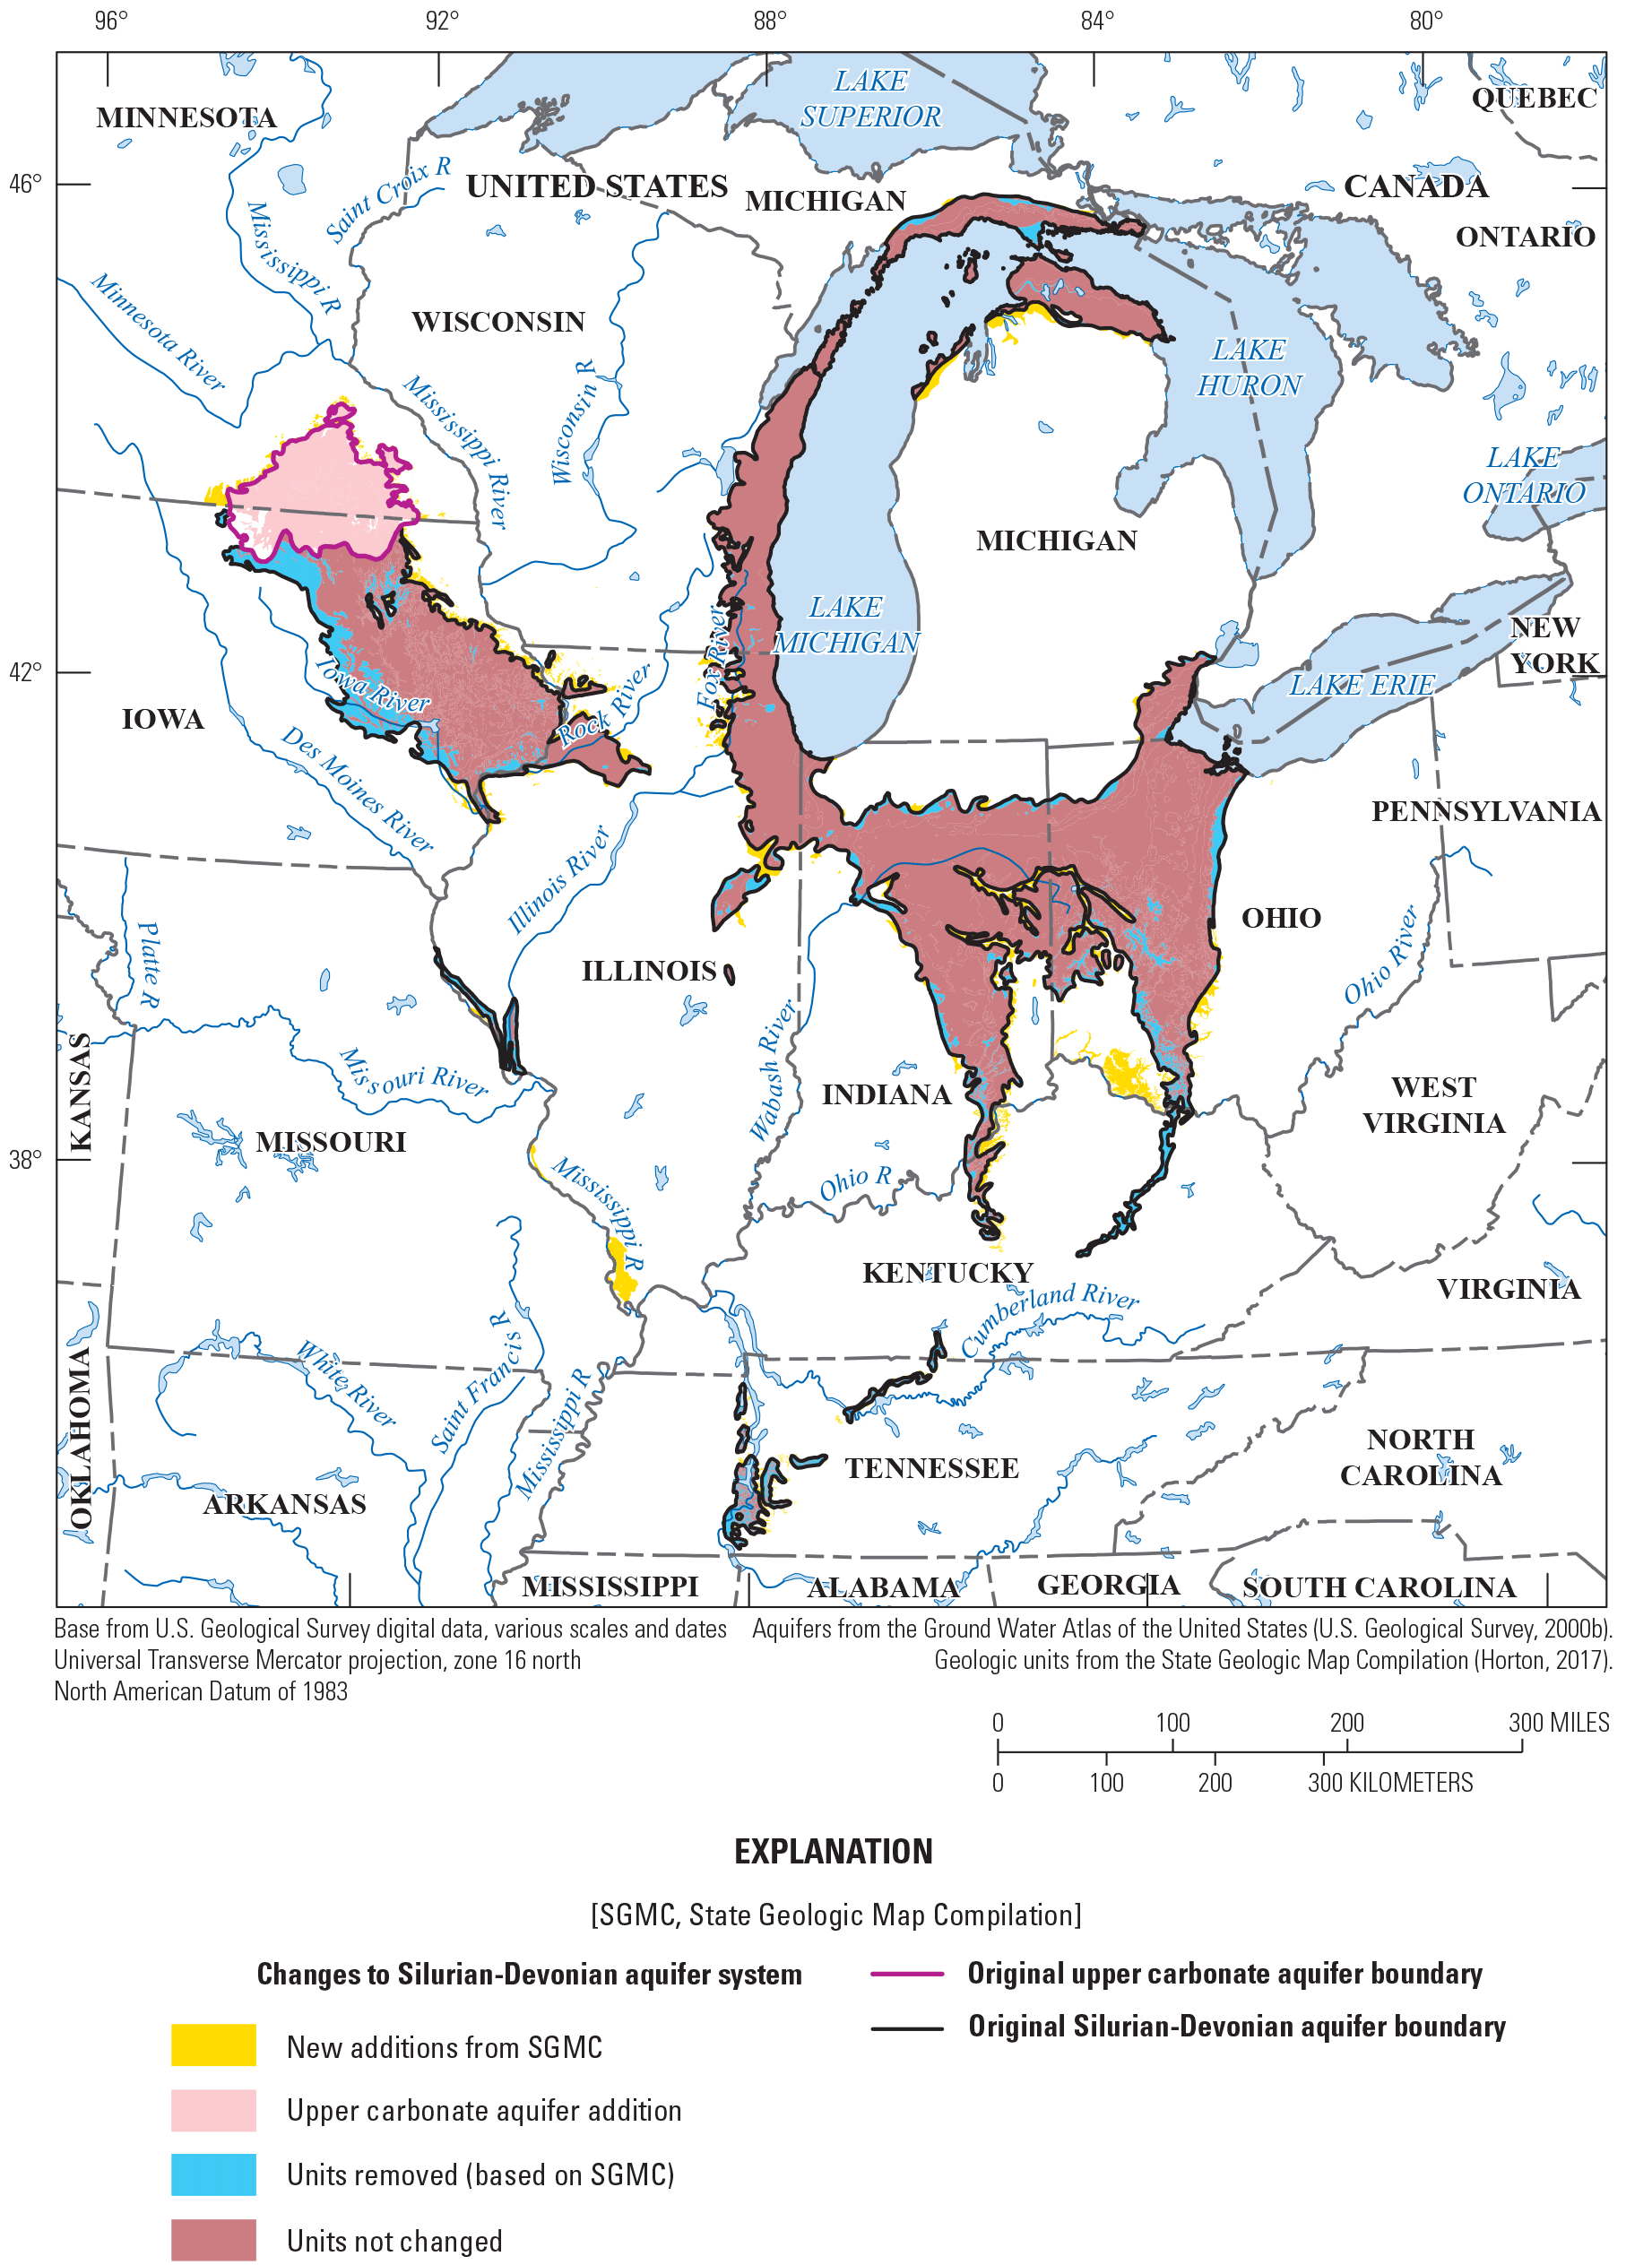 Increased level of spatial detail in the extent of the Silurian-Devonian aquifer system,
                        including units removed from and added to the boundary.